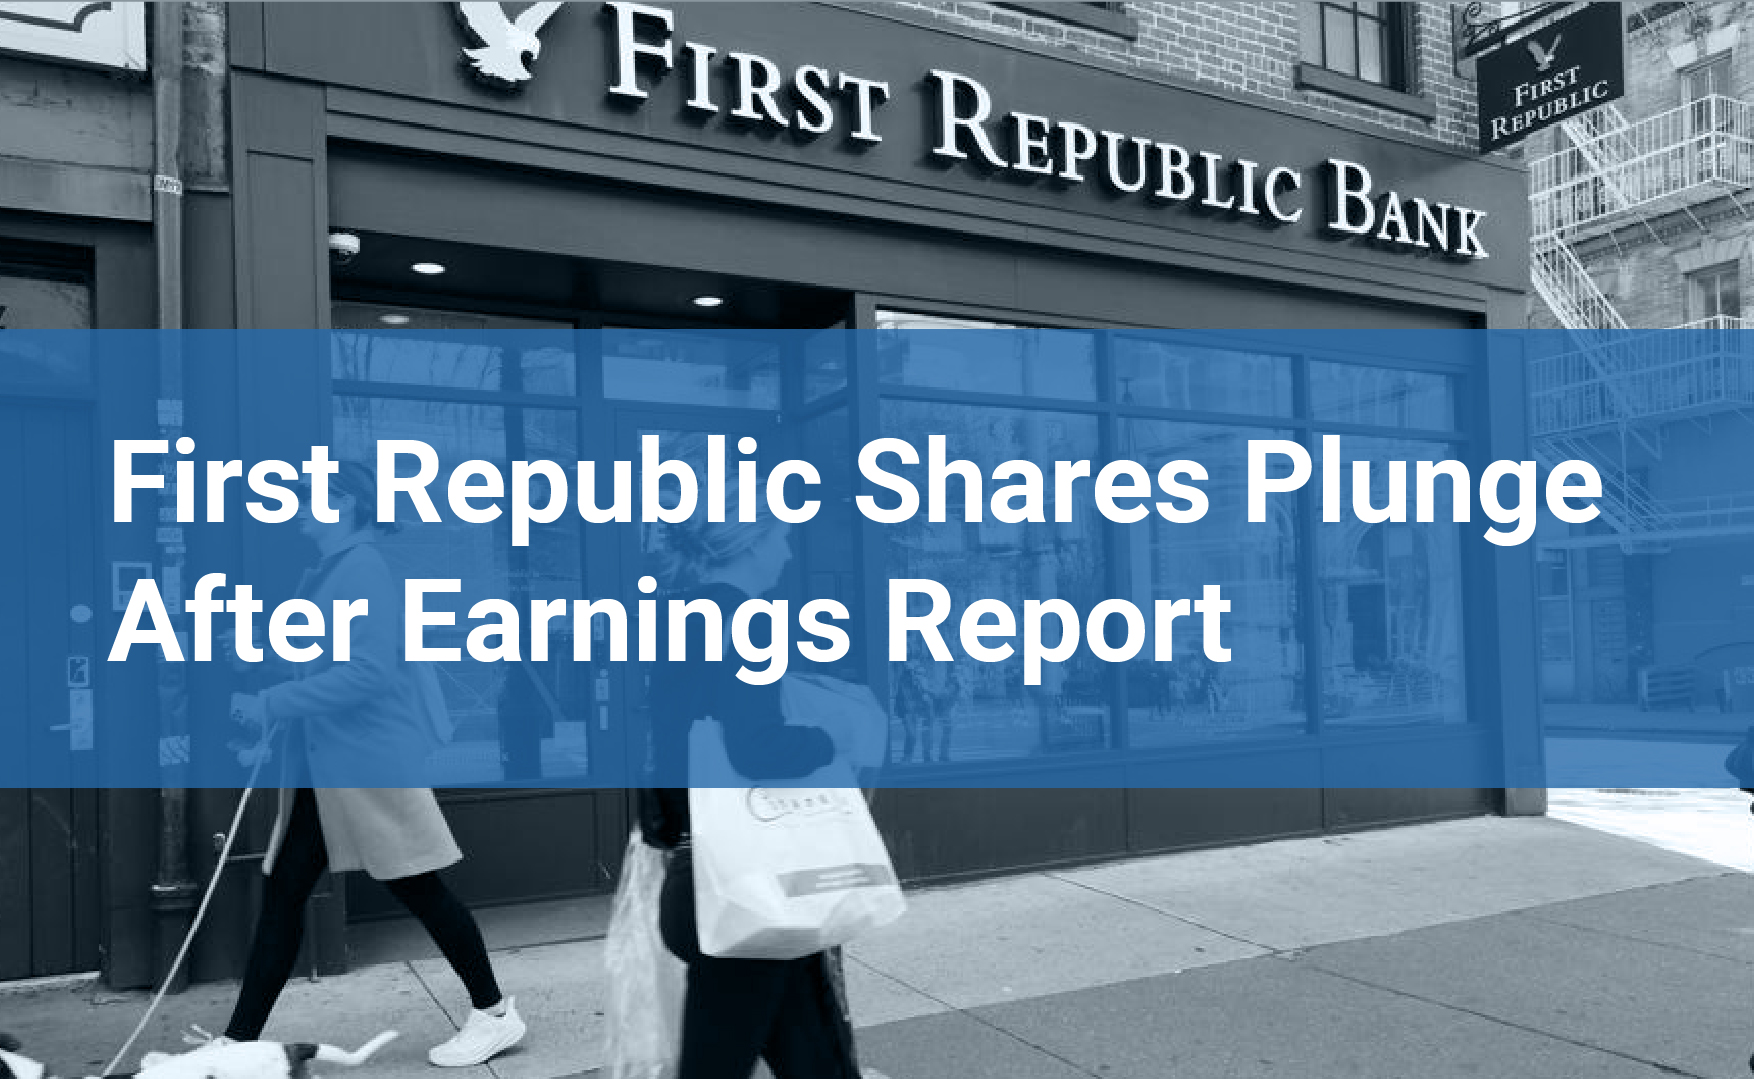 First Republic Shares Plunge After Earnings Report